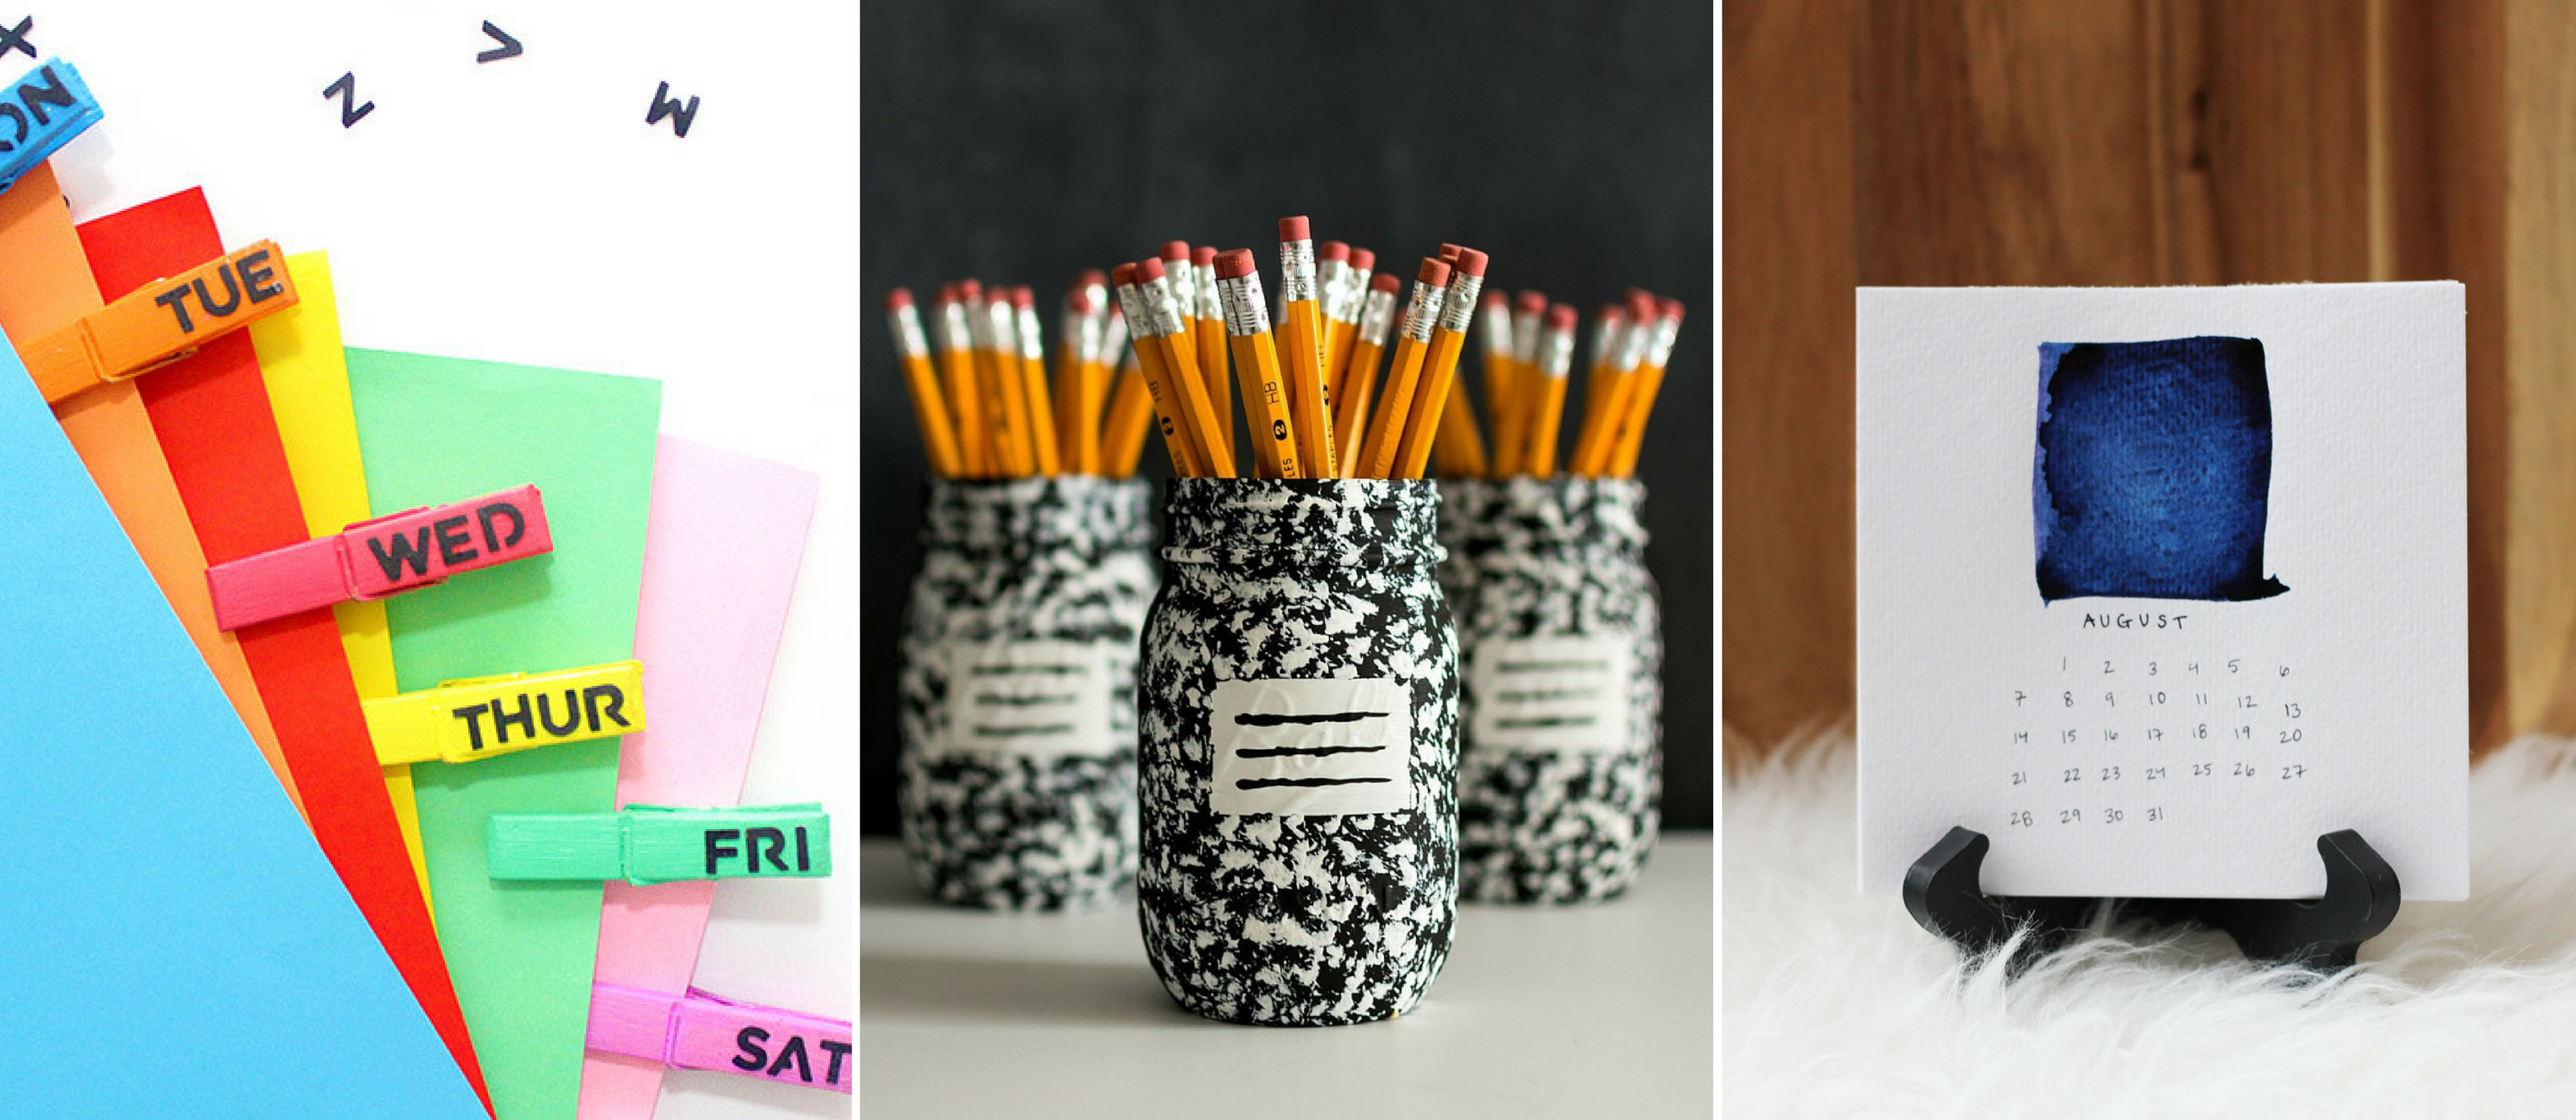 DIY: Washi Tape Storage Ideas - Teacher by trade, Mother by nature